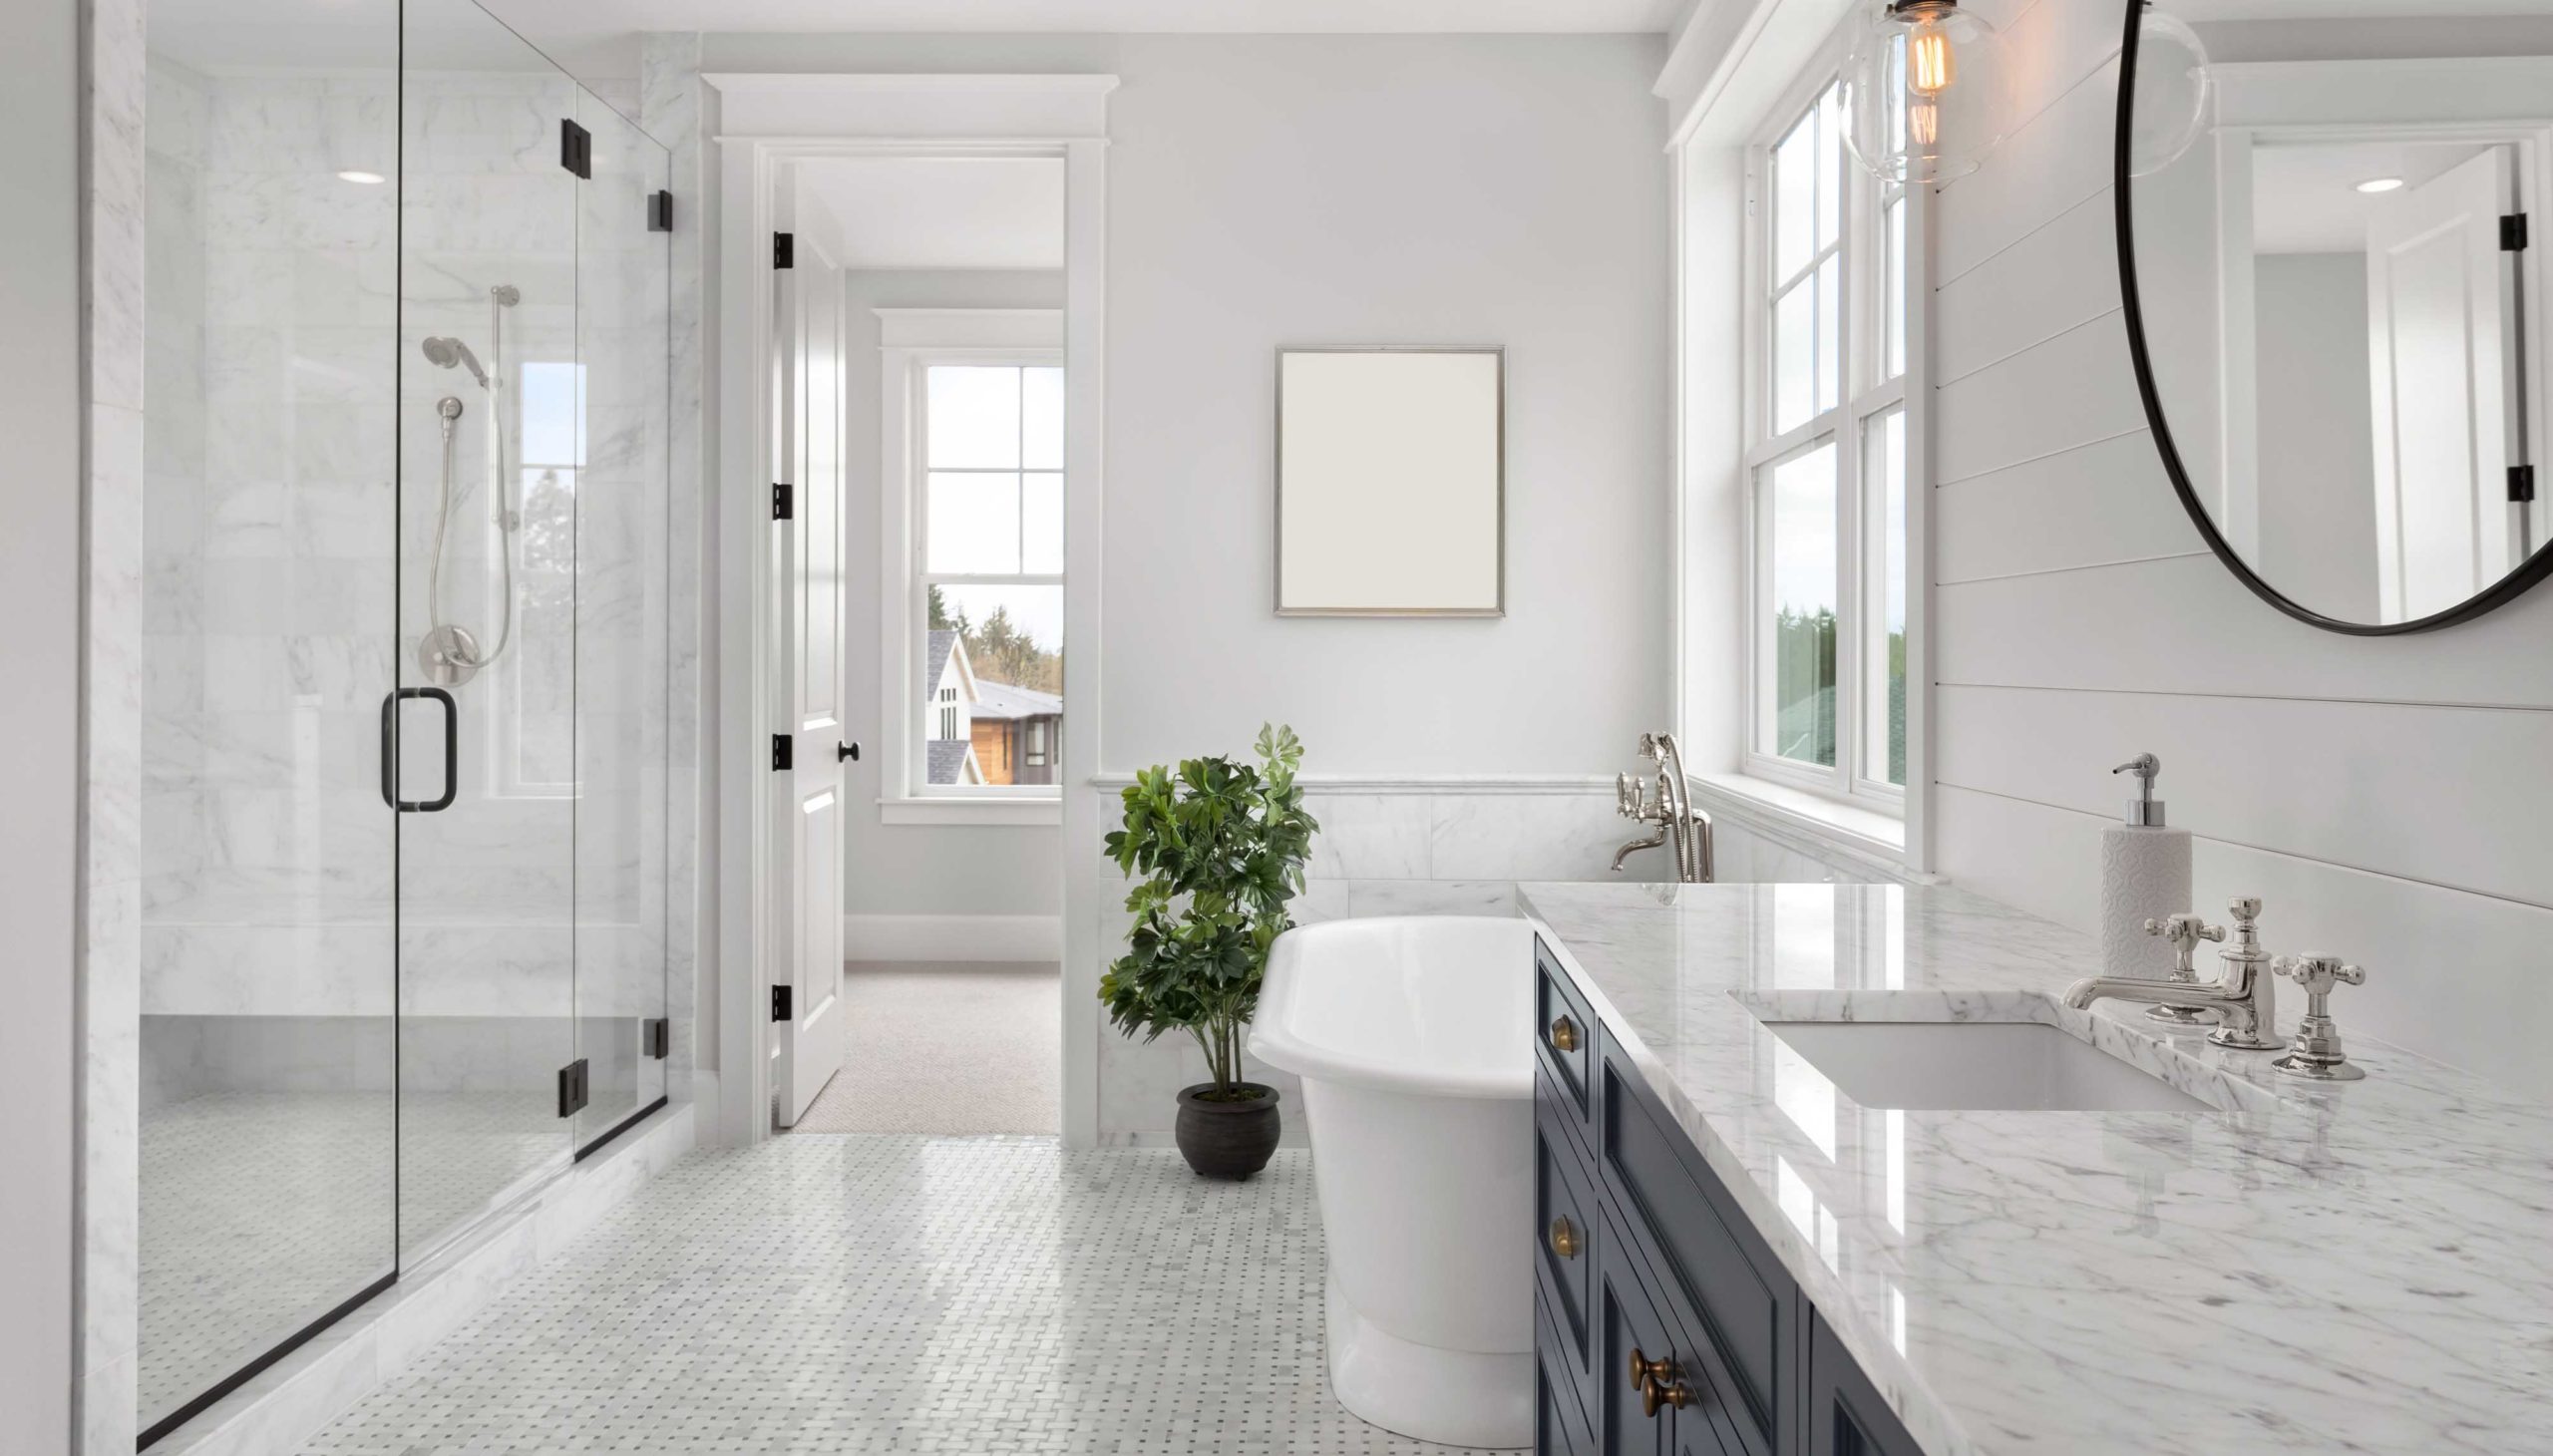 ready for your Bathroom remodel